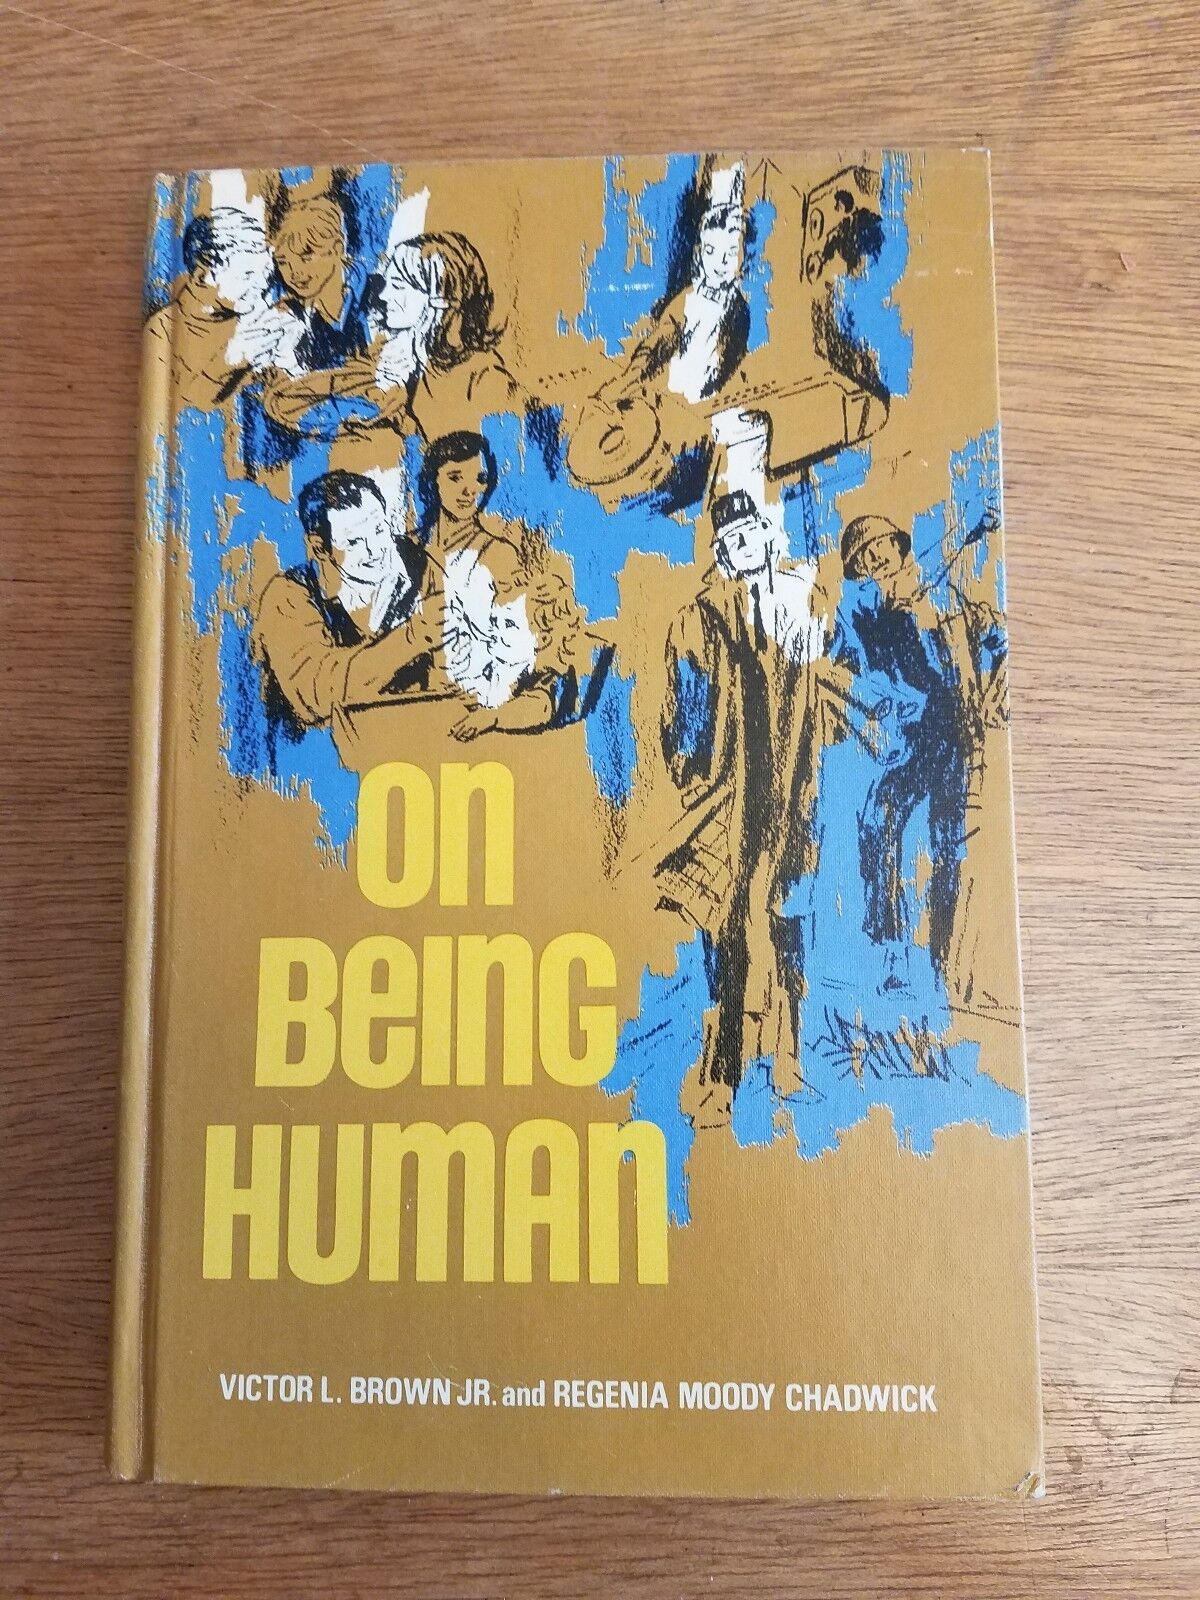 Vintage 1971 Mormon Book - On Being Human - Brown & Chadwick Parenting Guide HC